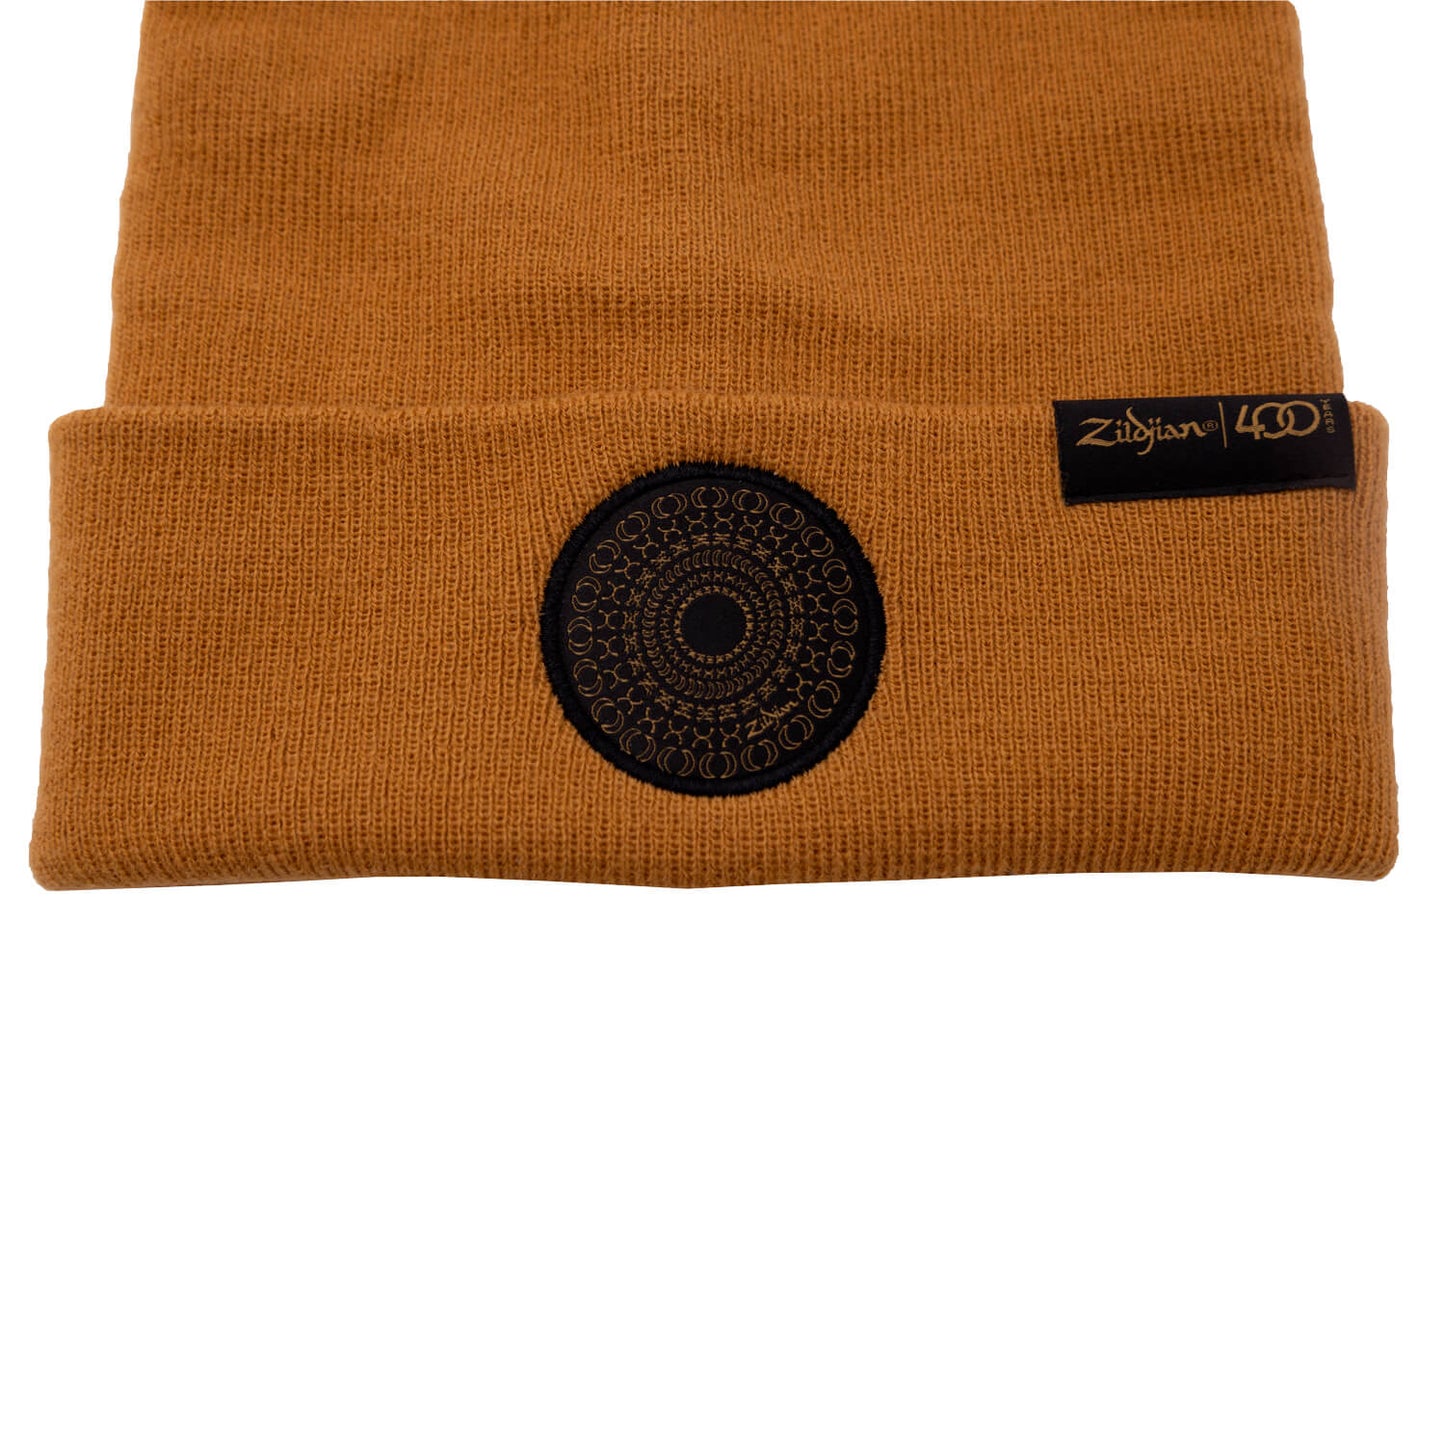 Zildjian Limited Edition 400th Anniversary Beanie (2 Colors)